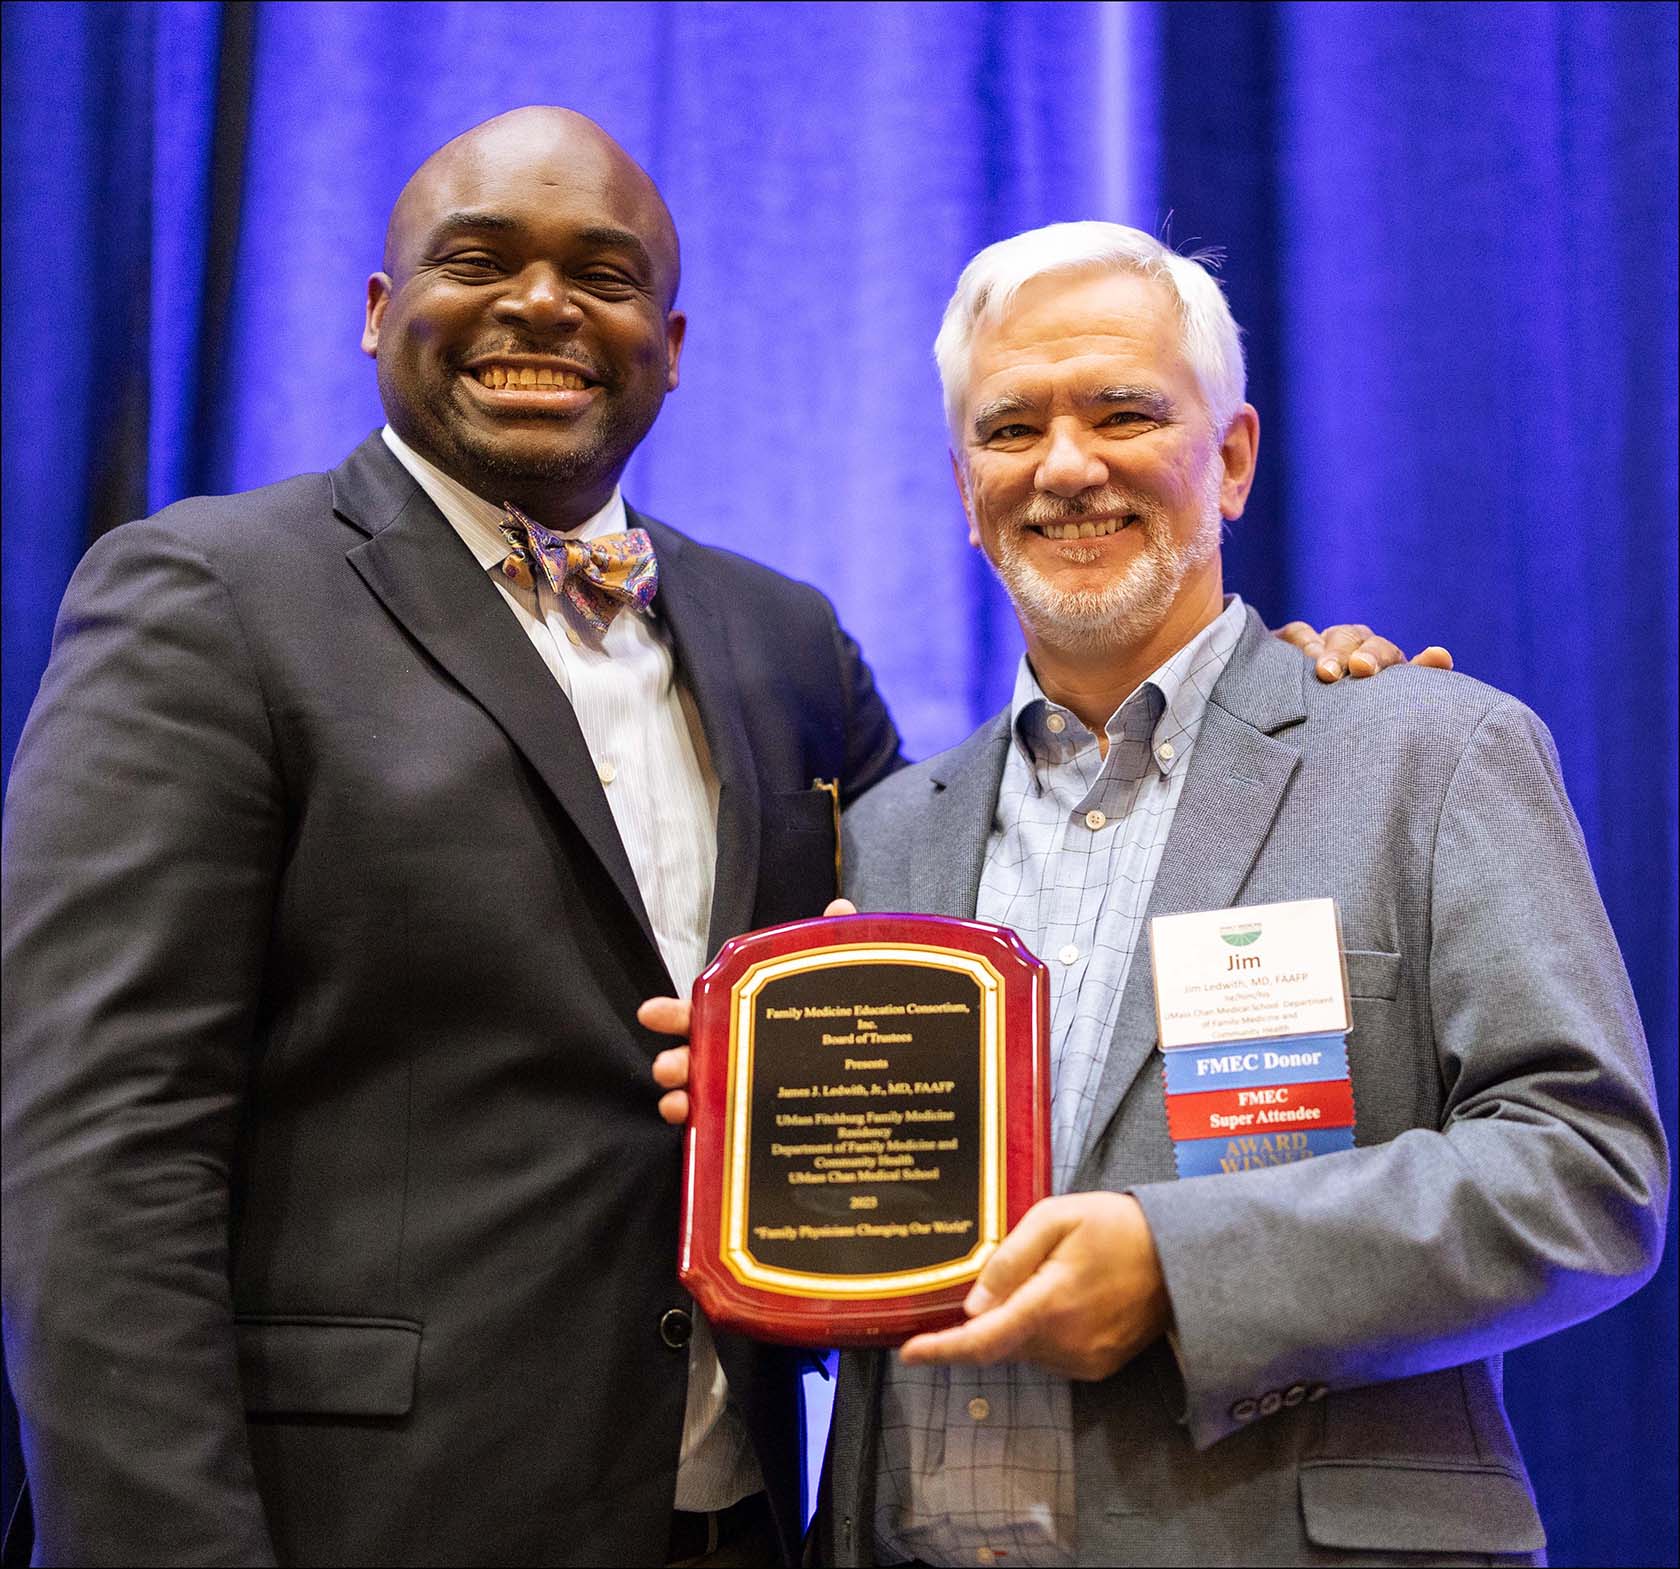 The Family Medicine Education Consortium honored James J. Ledwith, M’83, with the 2023 Family Physicians Who Are Changing Our World Award, in part for his advocacy for responsible care for patients who depend on opioid medication and his leadership in training physicians how to treat opioid use disorder.